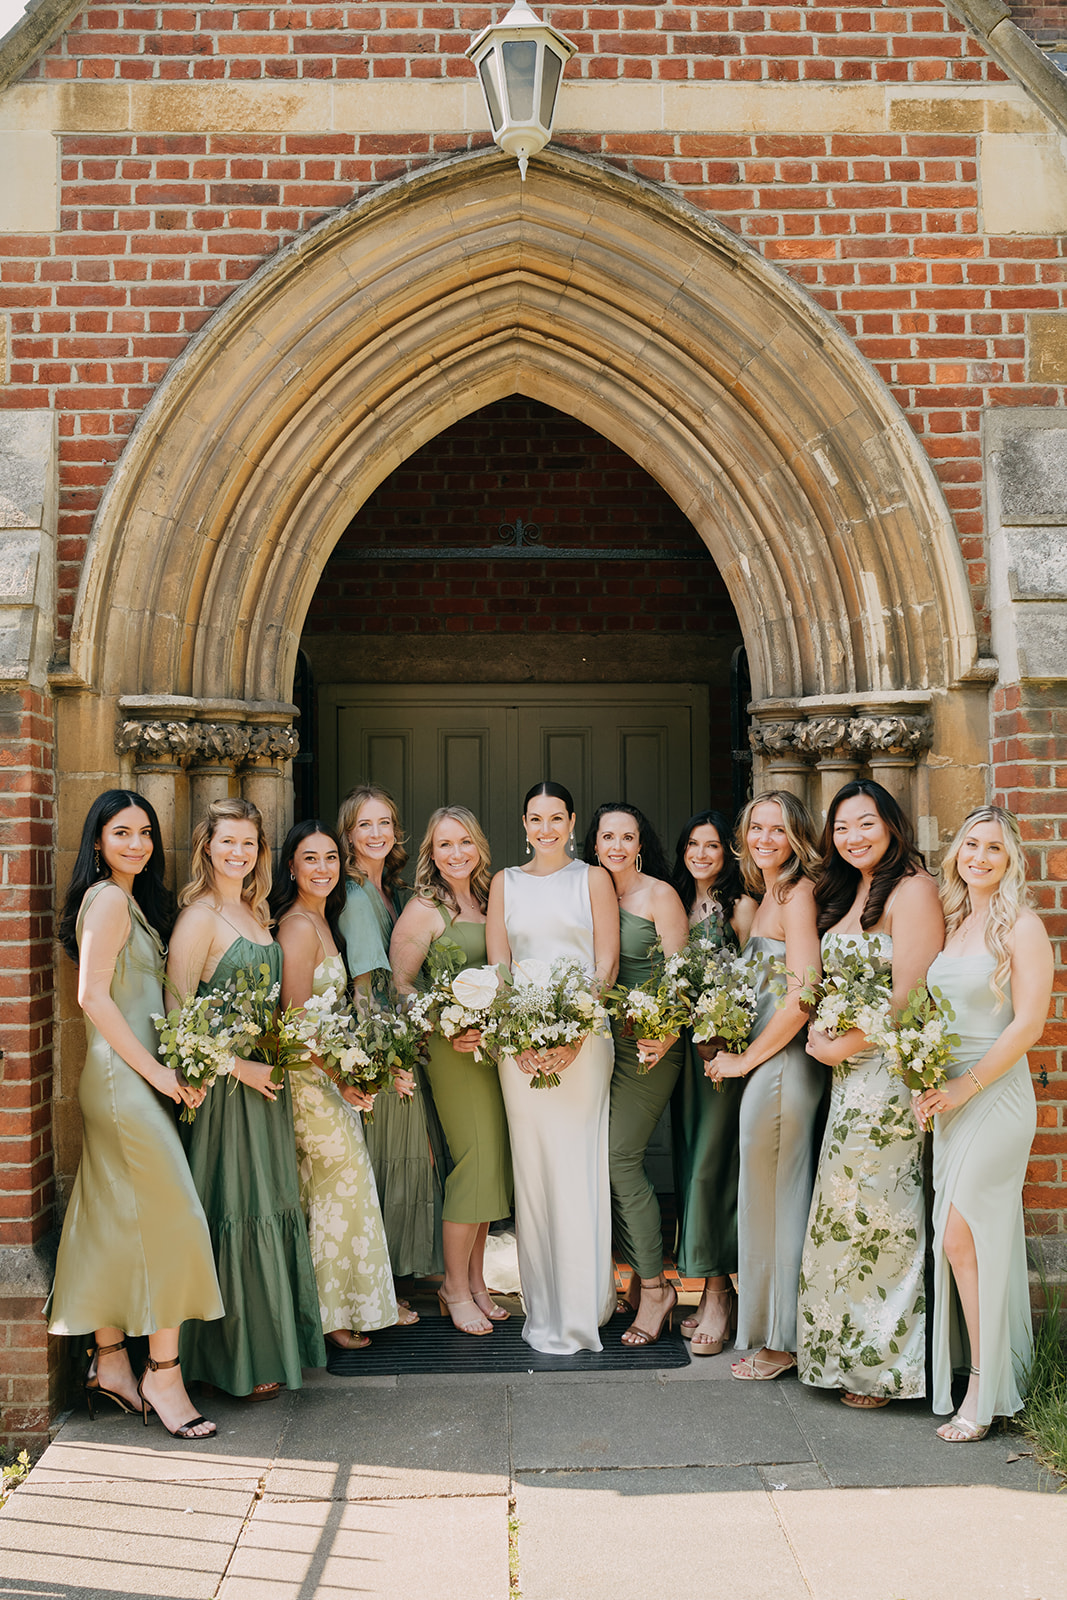 Bride and bridesmaids in mismatched sage green silk dresses and with green and white flowers